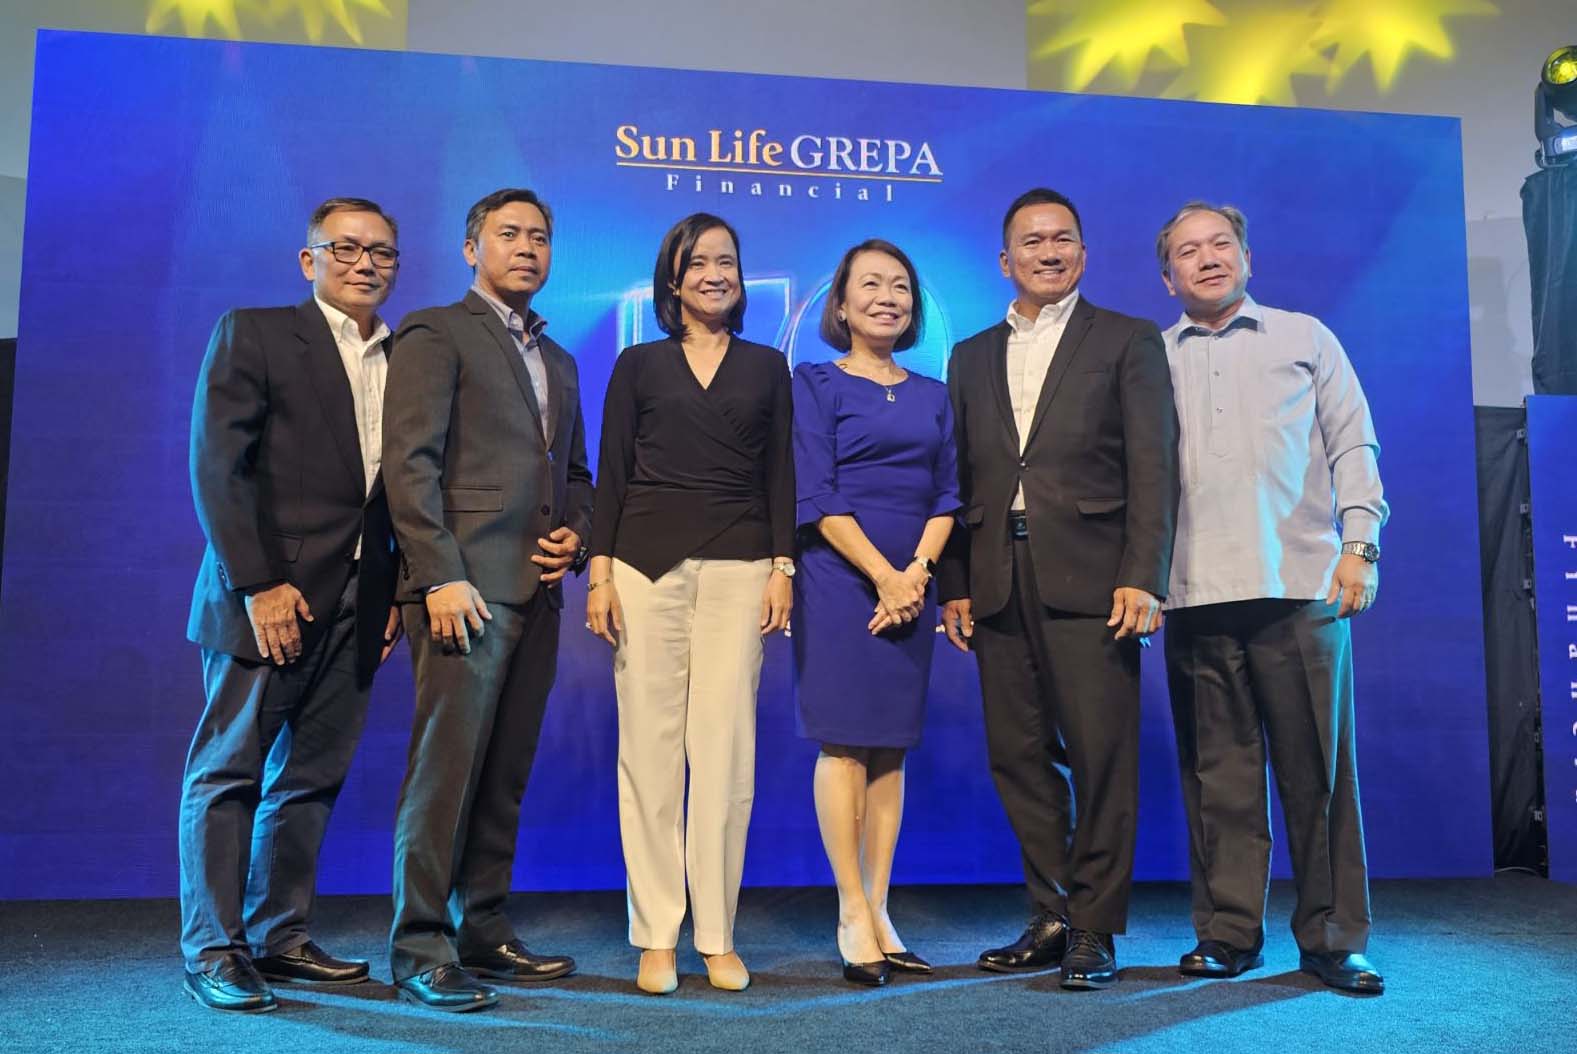 Sun Life Grepa aims to provide insurance for every Filipino family on its 70th year